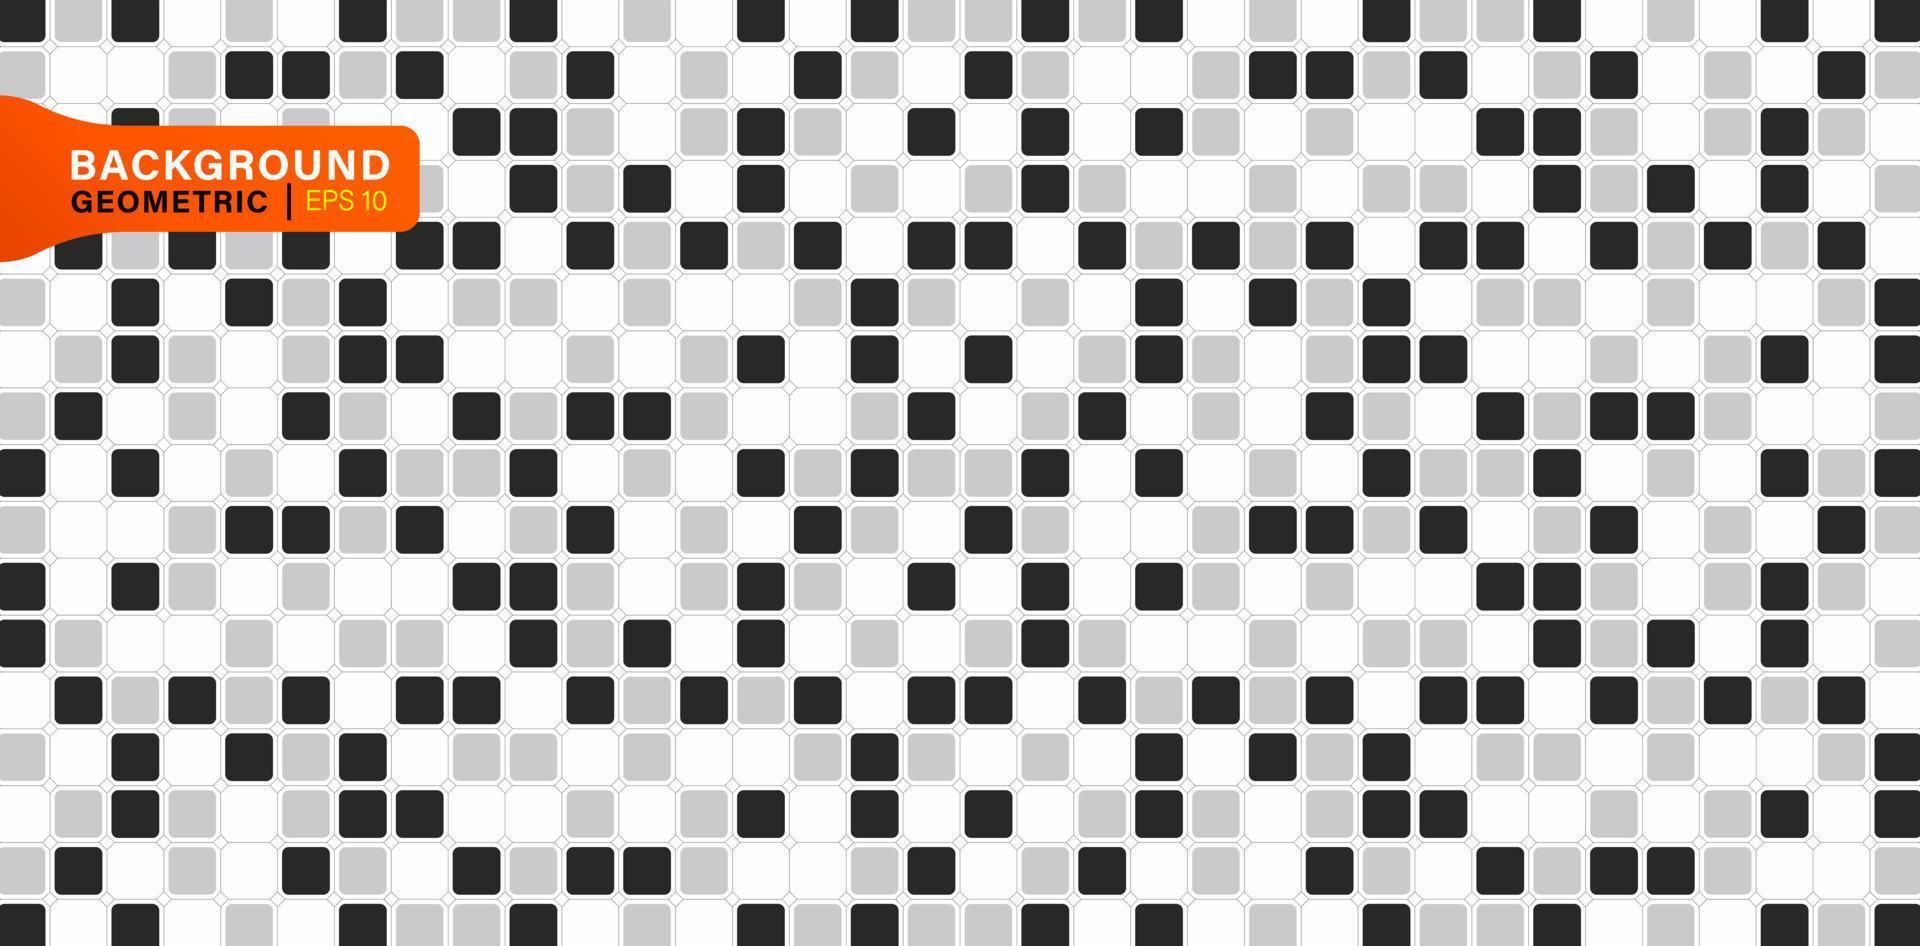 illustration of Abstract background with black and white squares or qr code on white background for Presentations and decks business or corporate, Advertising, ads, book covers, marketing materials vector